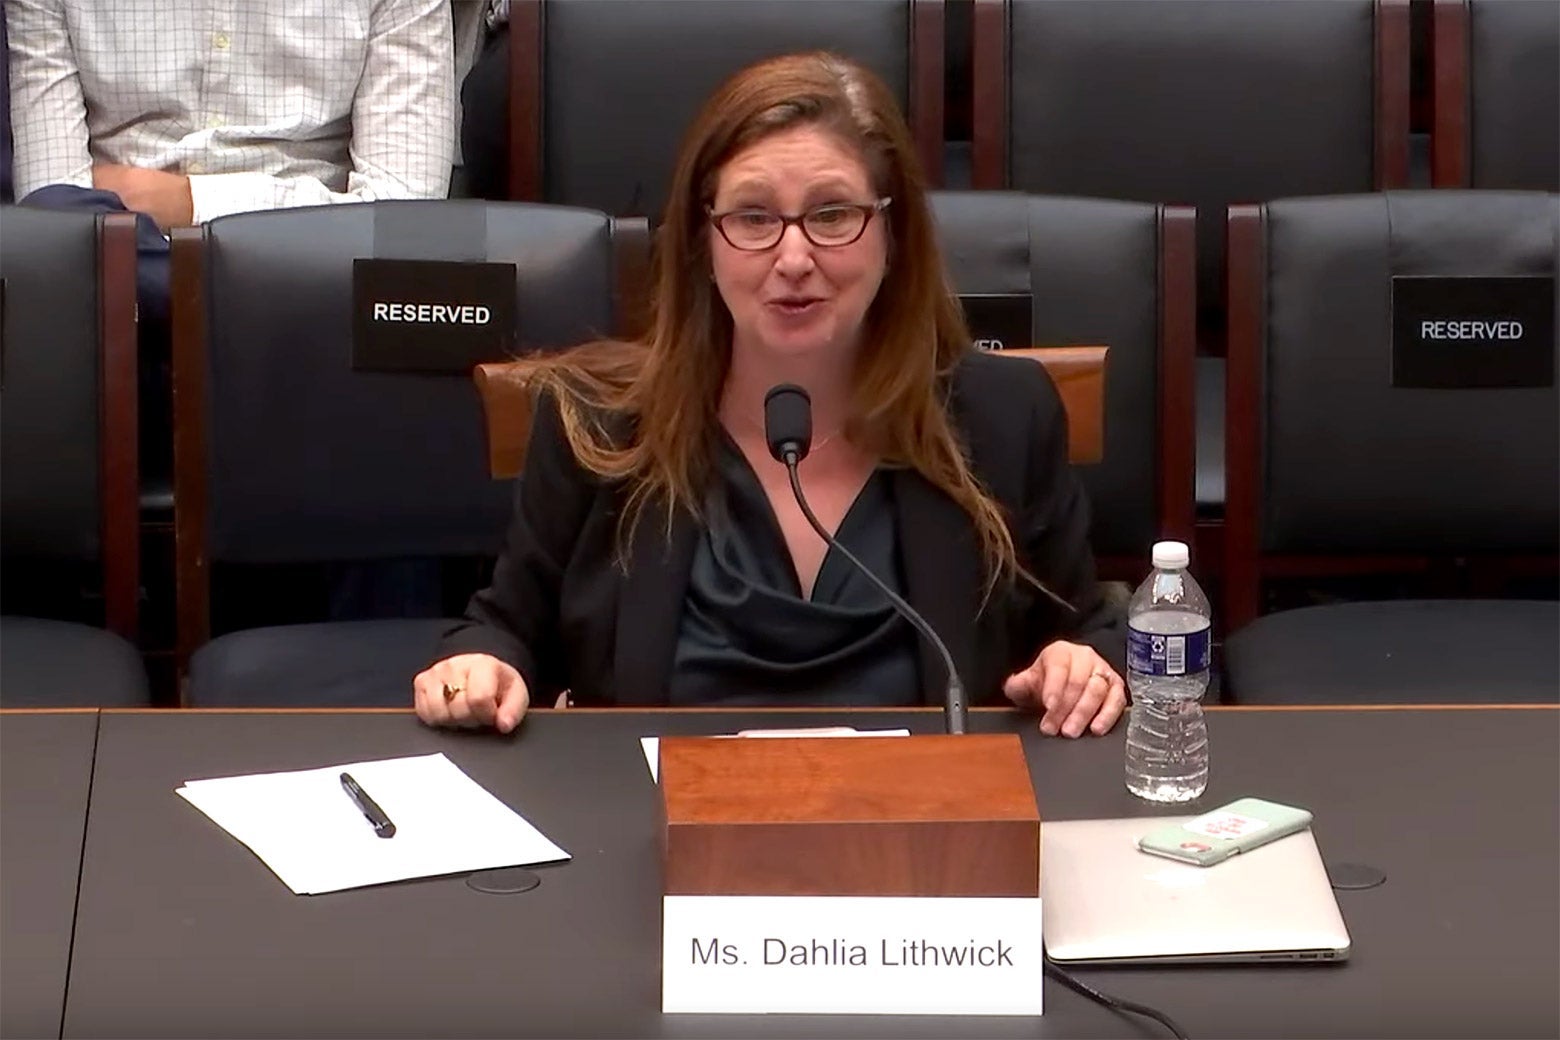 Dahlia Lithwick speaks into a microphone when testifying to the House Judiciary Committee.